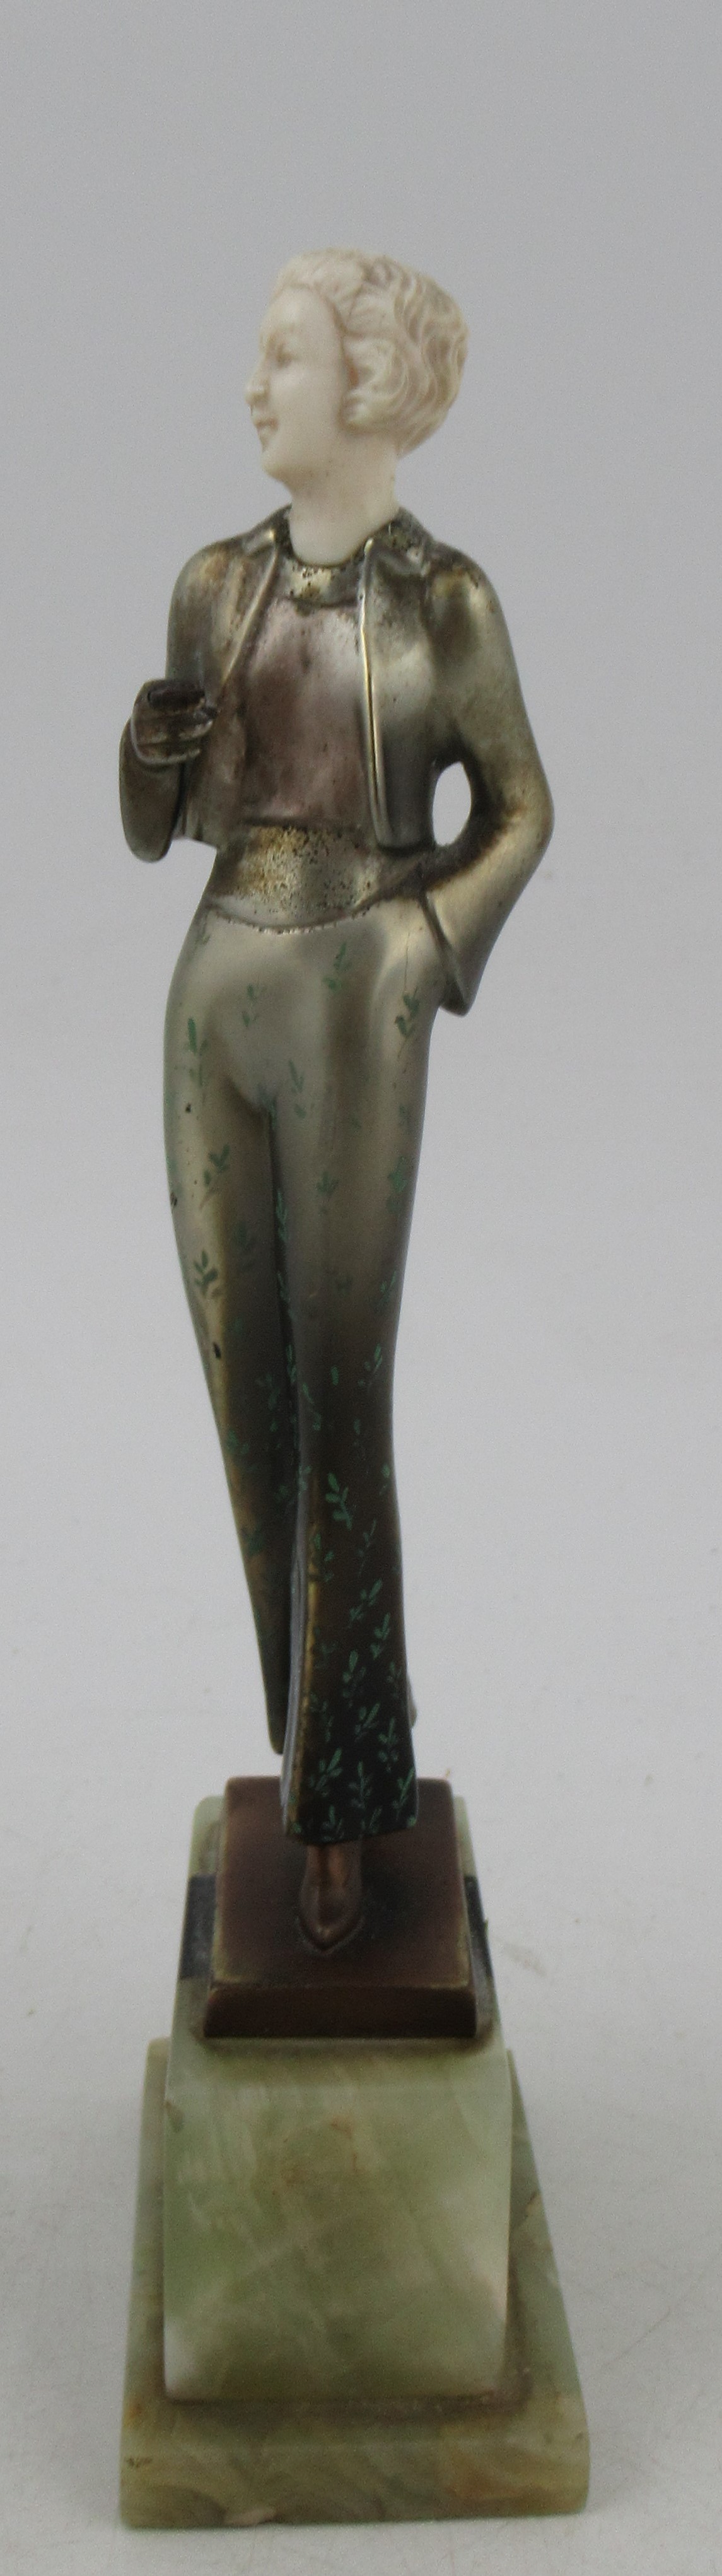 Lorenzl, a patinated bronze and ivorine figure, of a stylish Art Deco woman, signed to bronze - Image 4 of 7